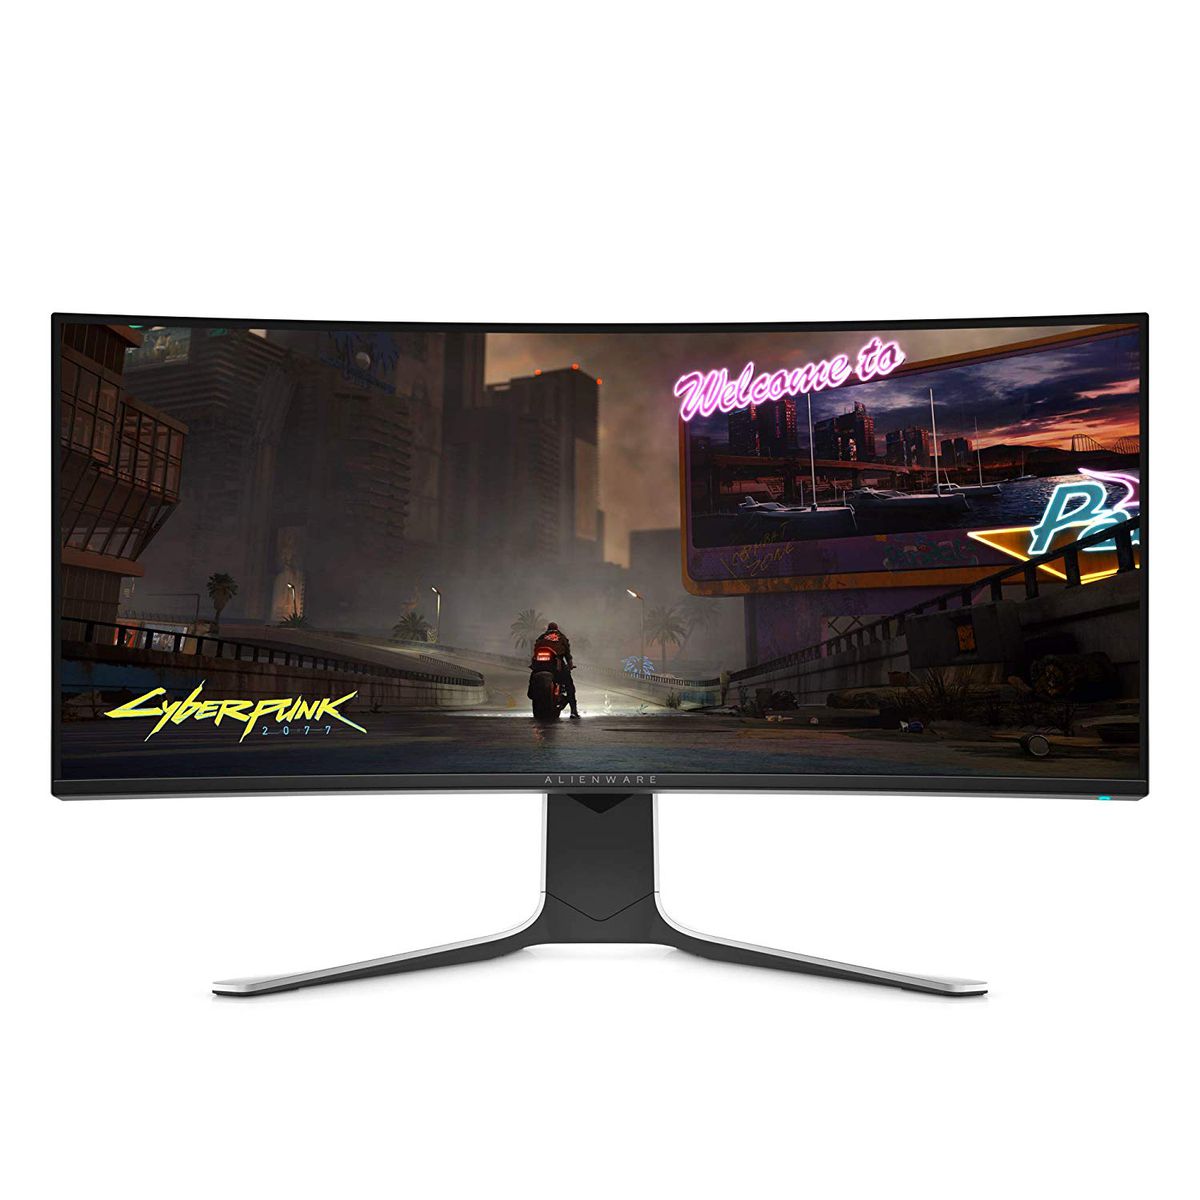 A product shot of Alienware’s 34-inch curved monitor